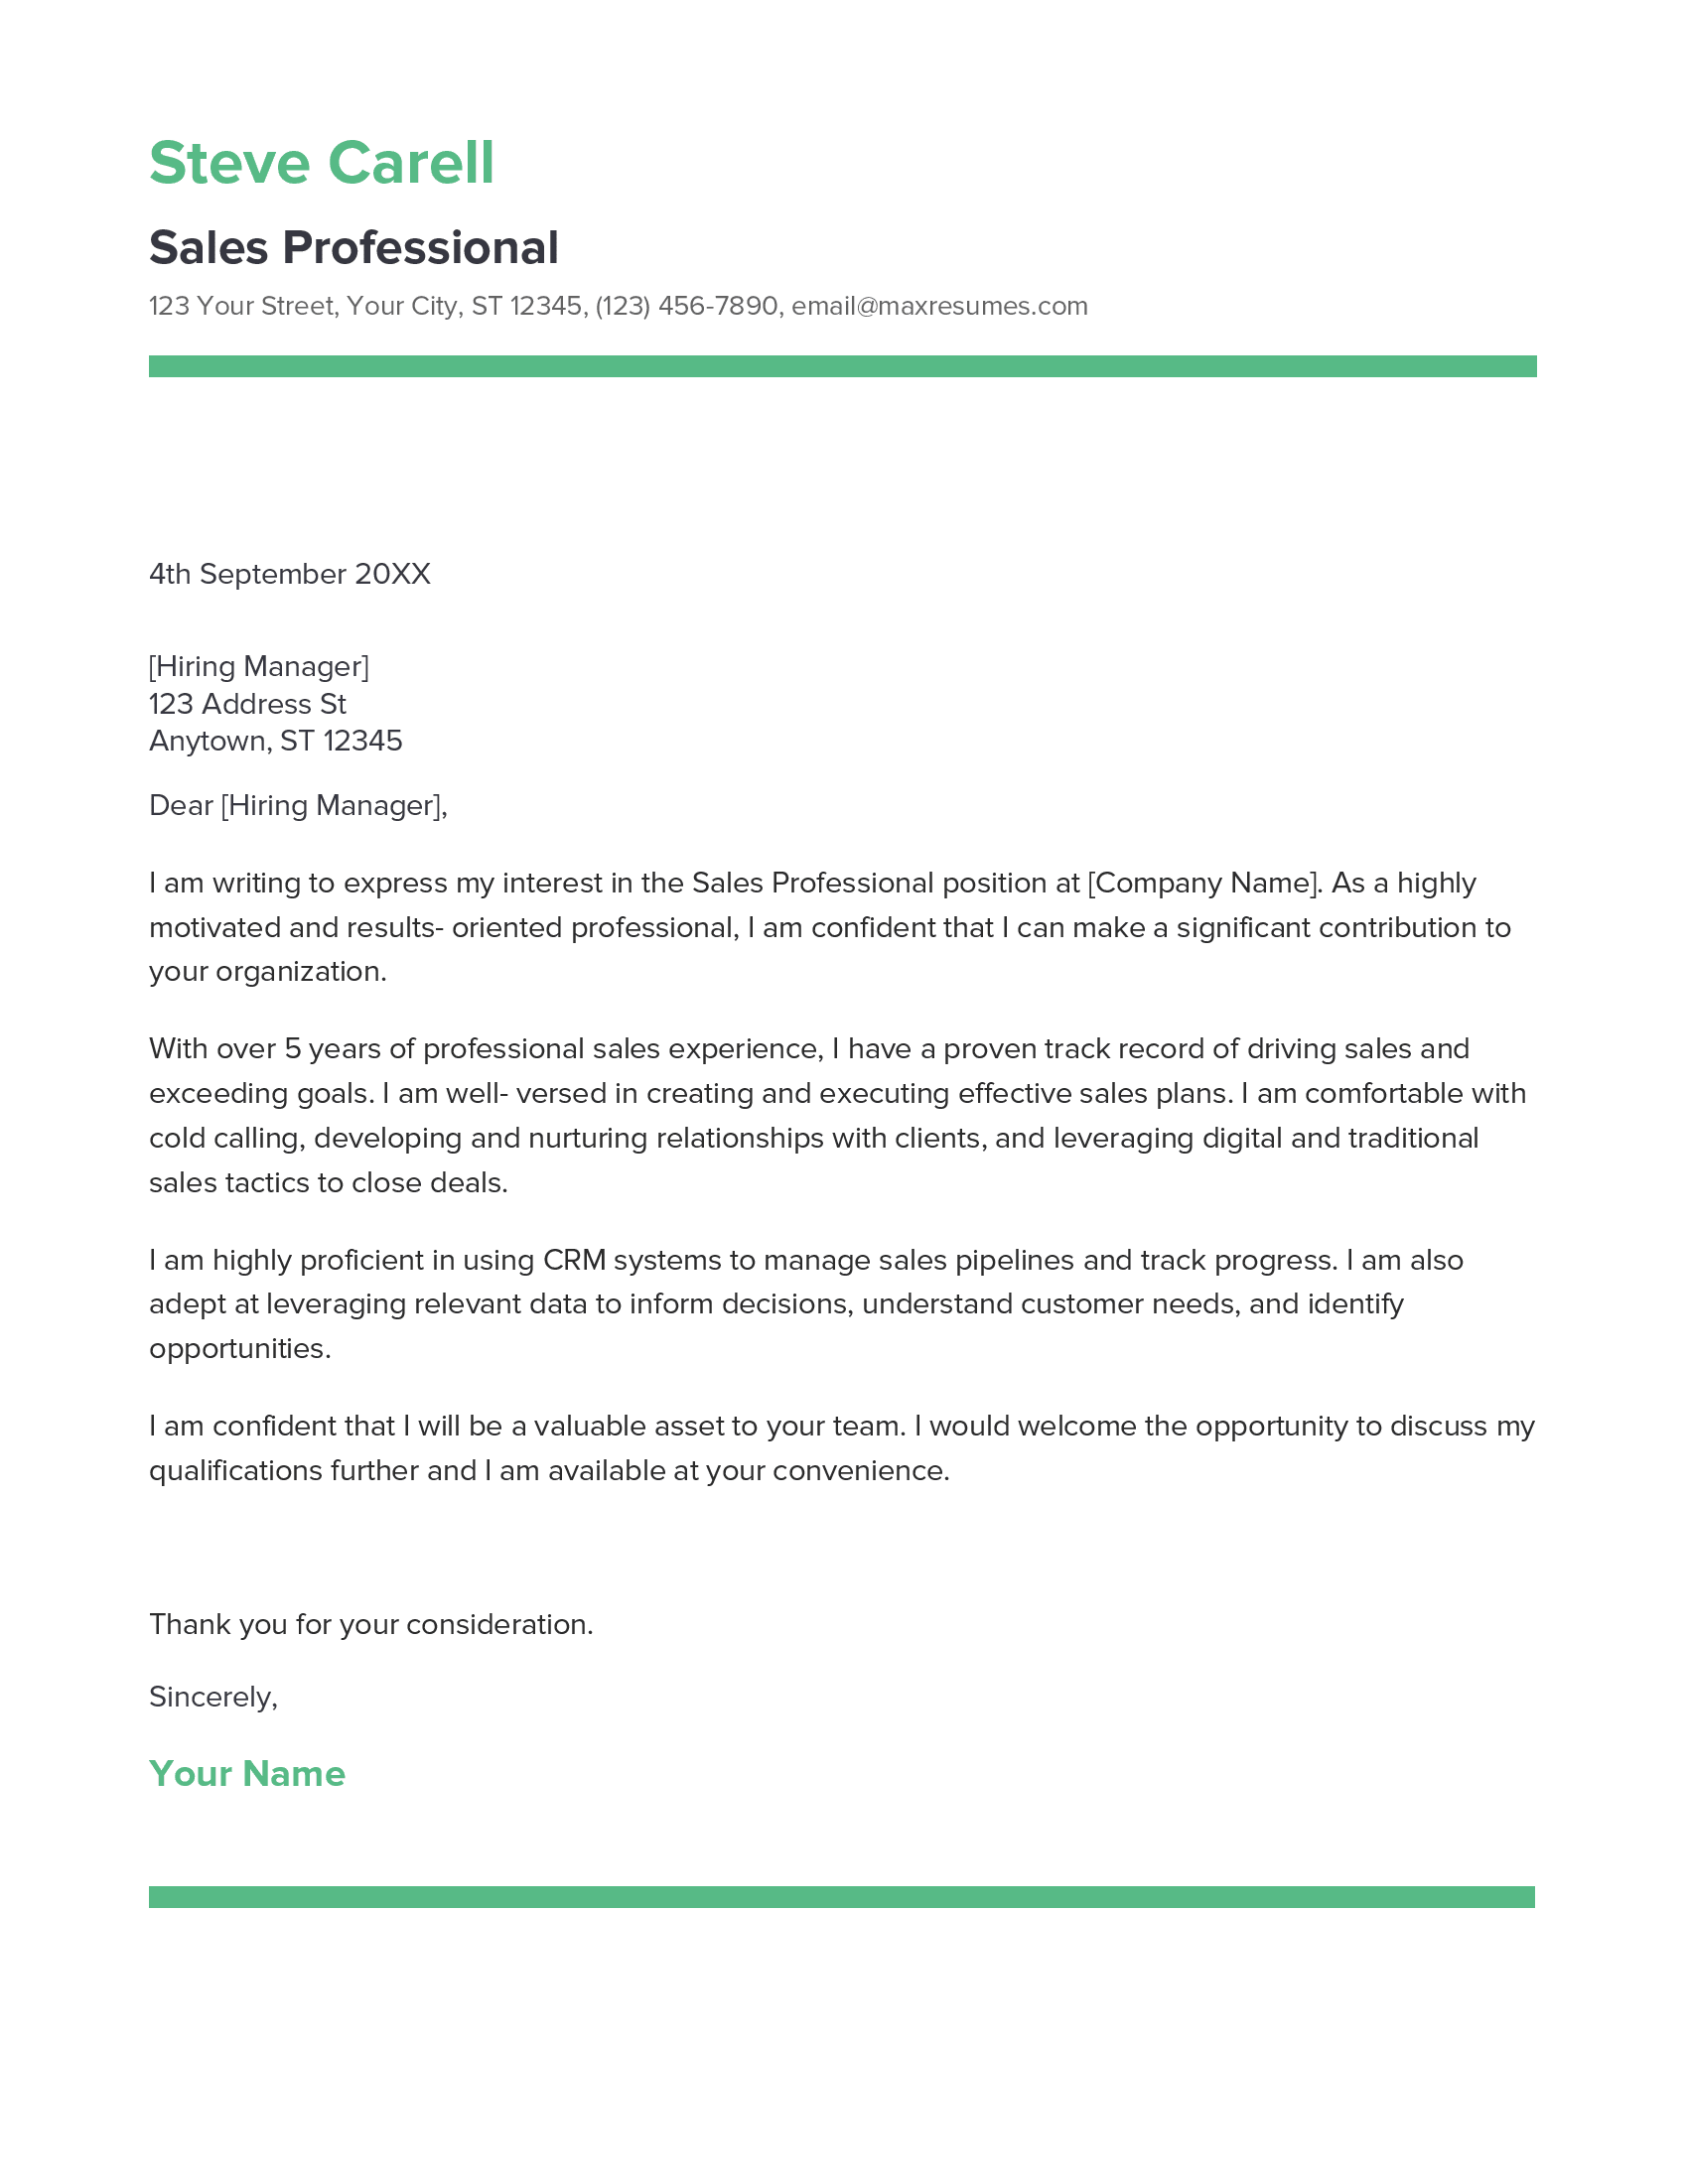 Sales Professional Cover Letter Example